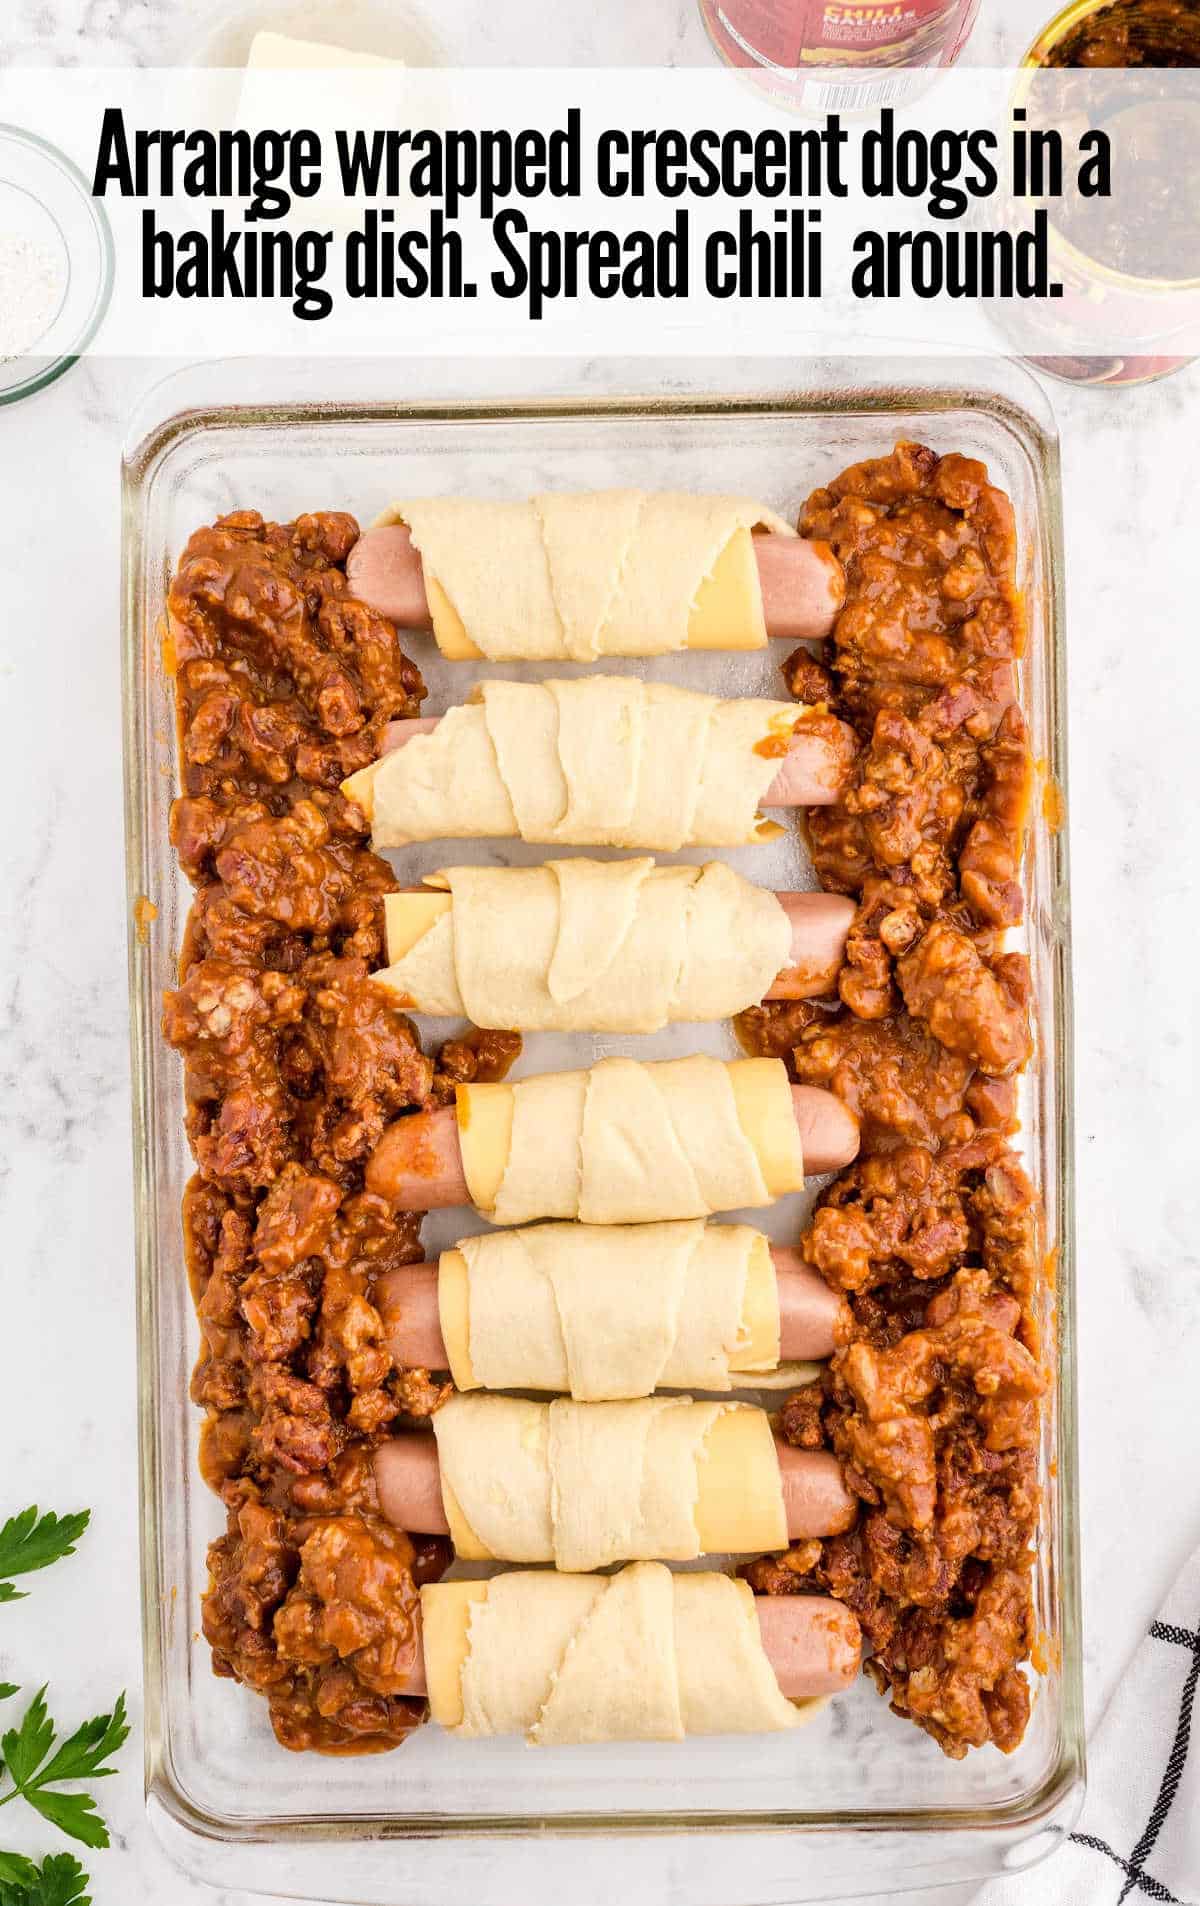 wrapped dogs and chili placed in a baking dish